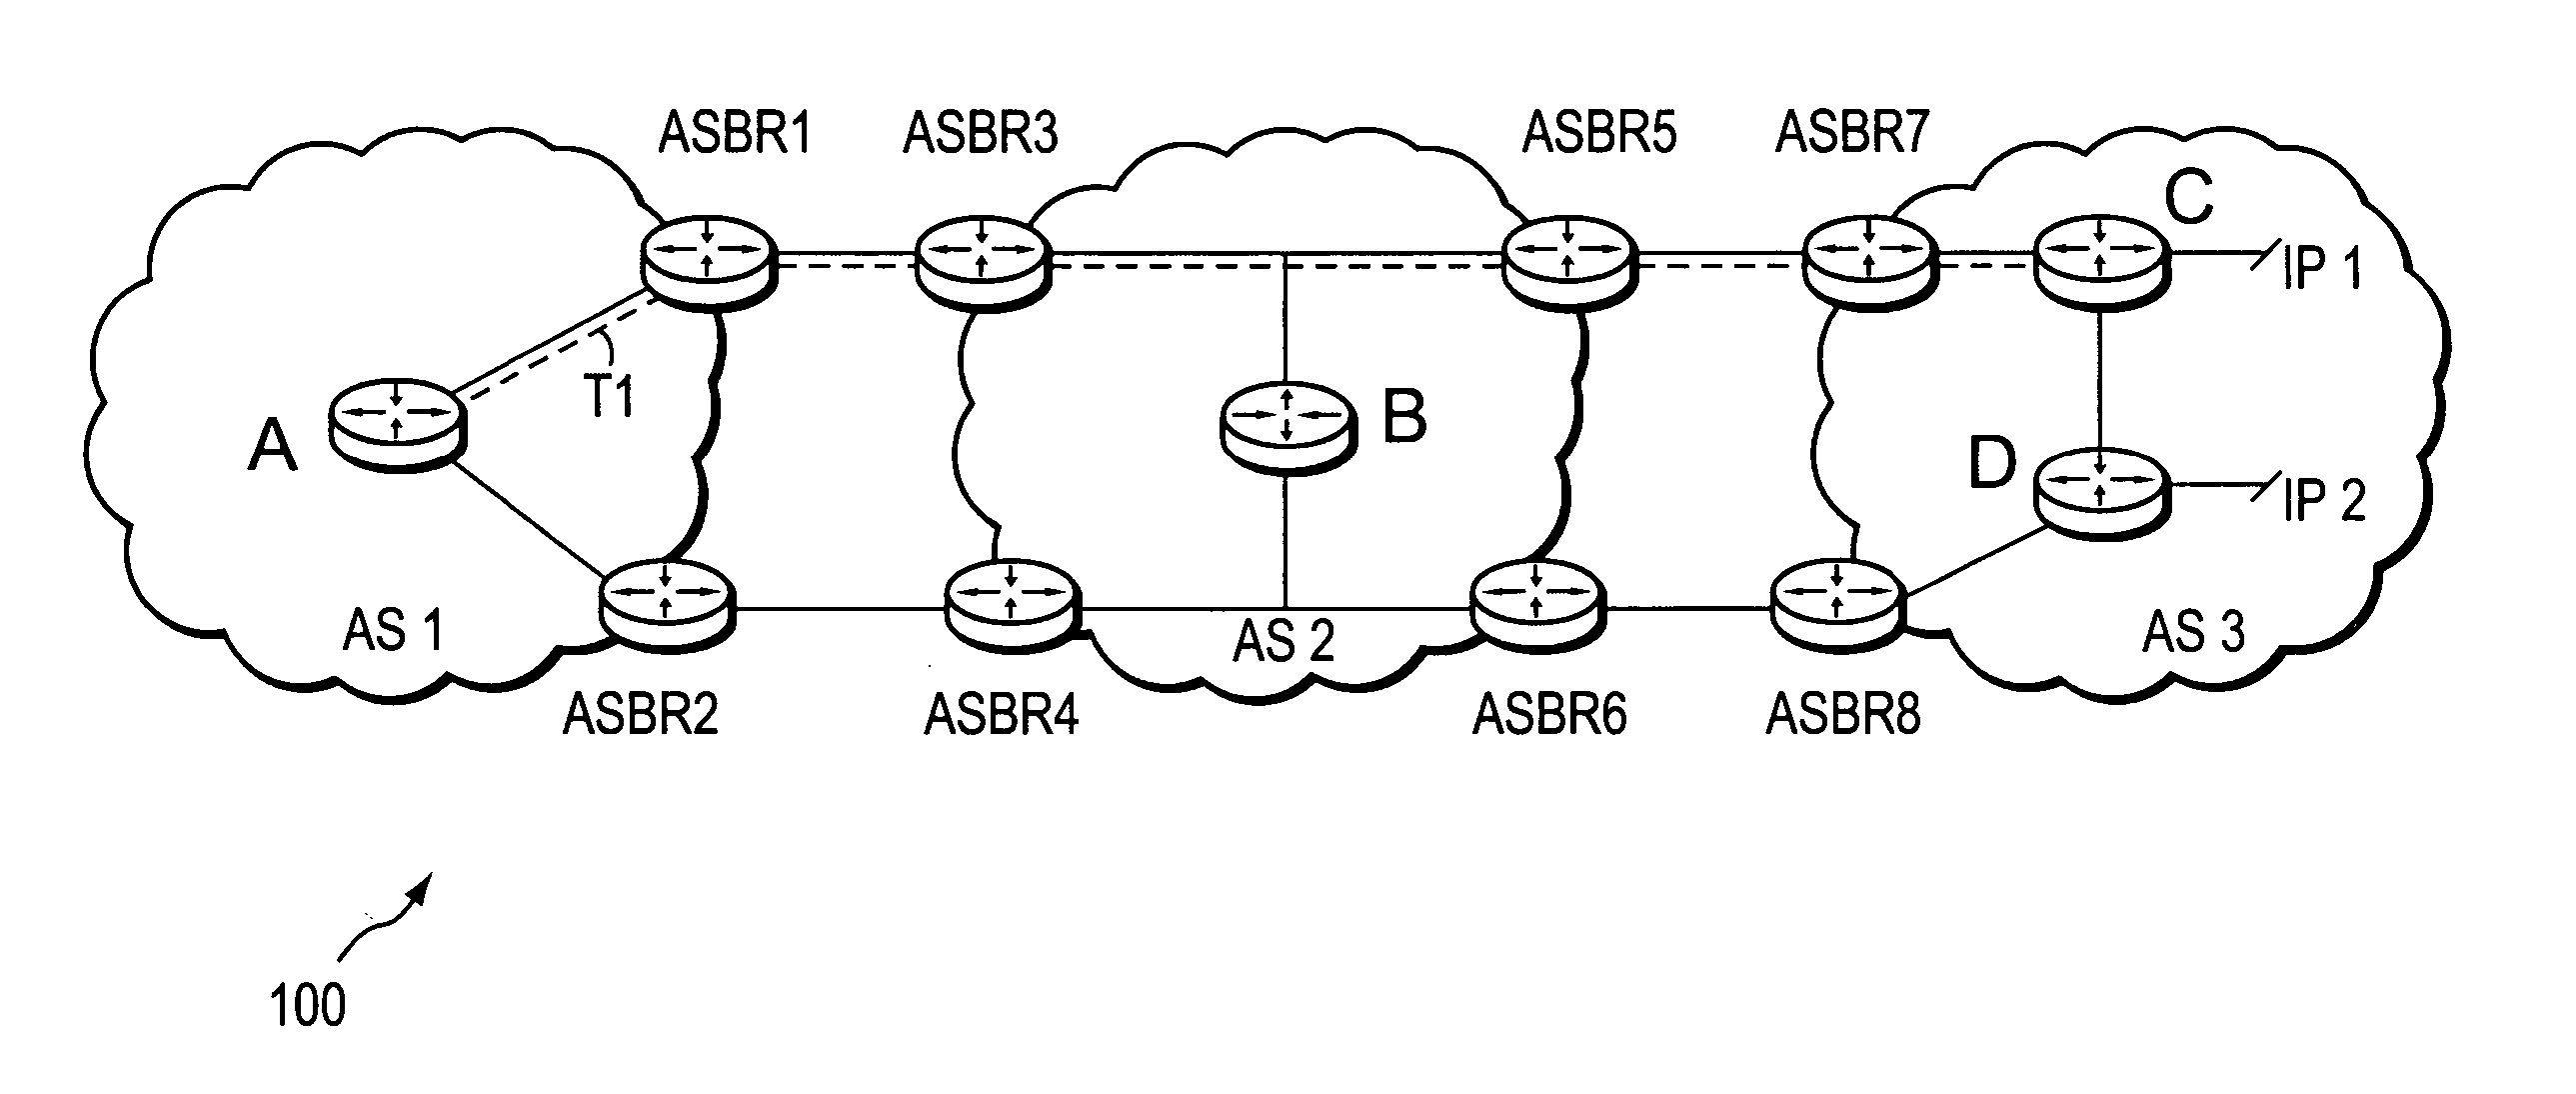 Dynamic retrieval of routing information for inter-AS TE-LSPs